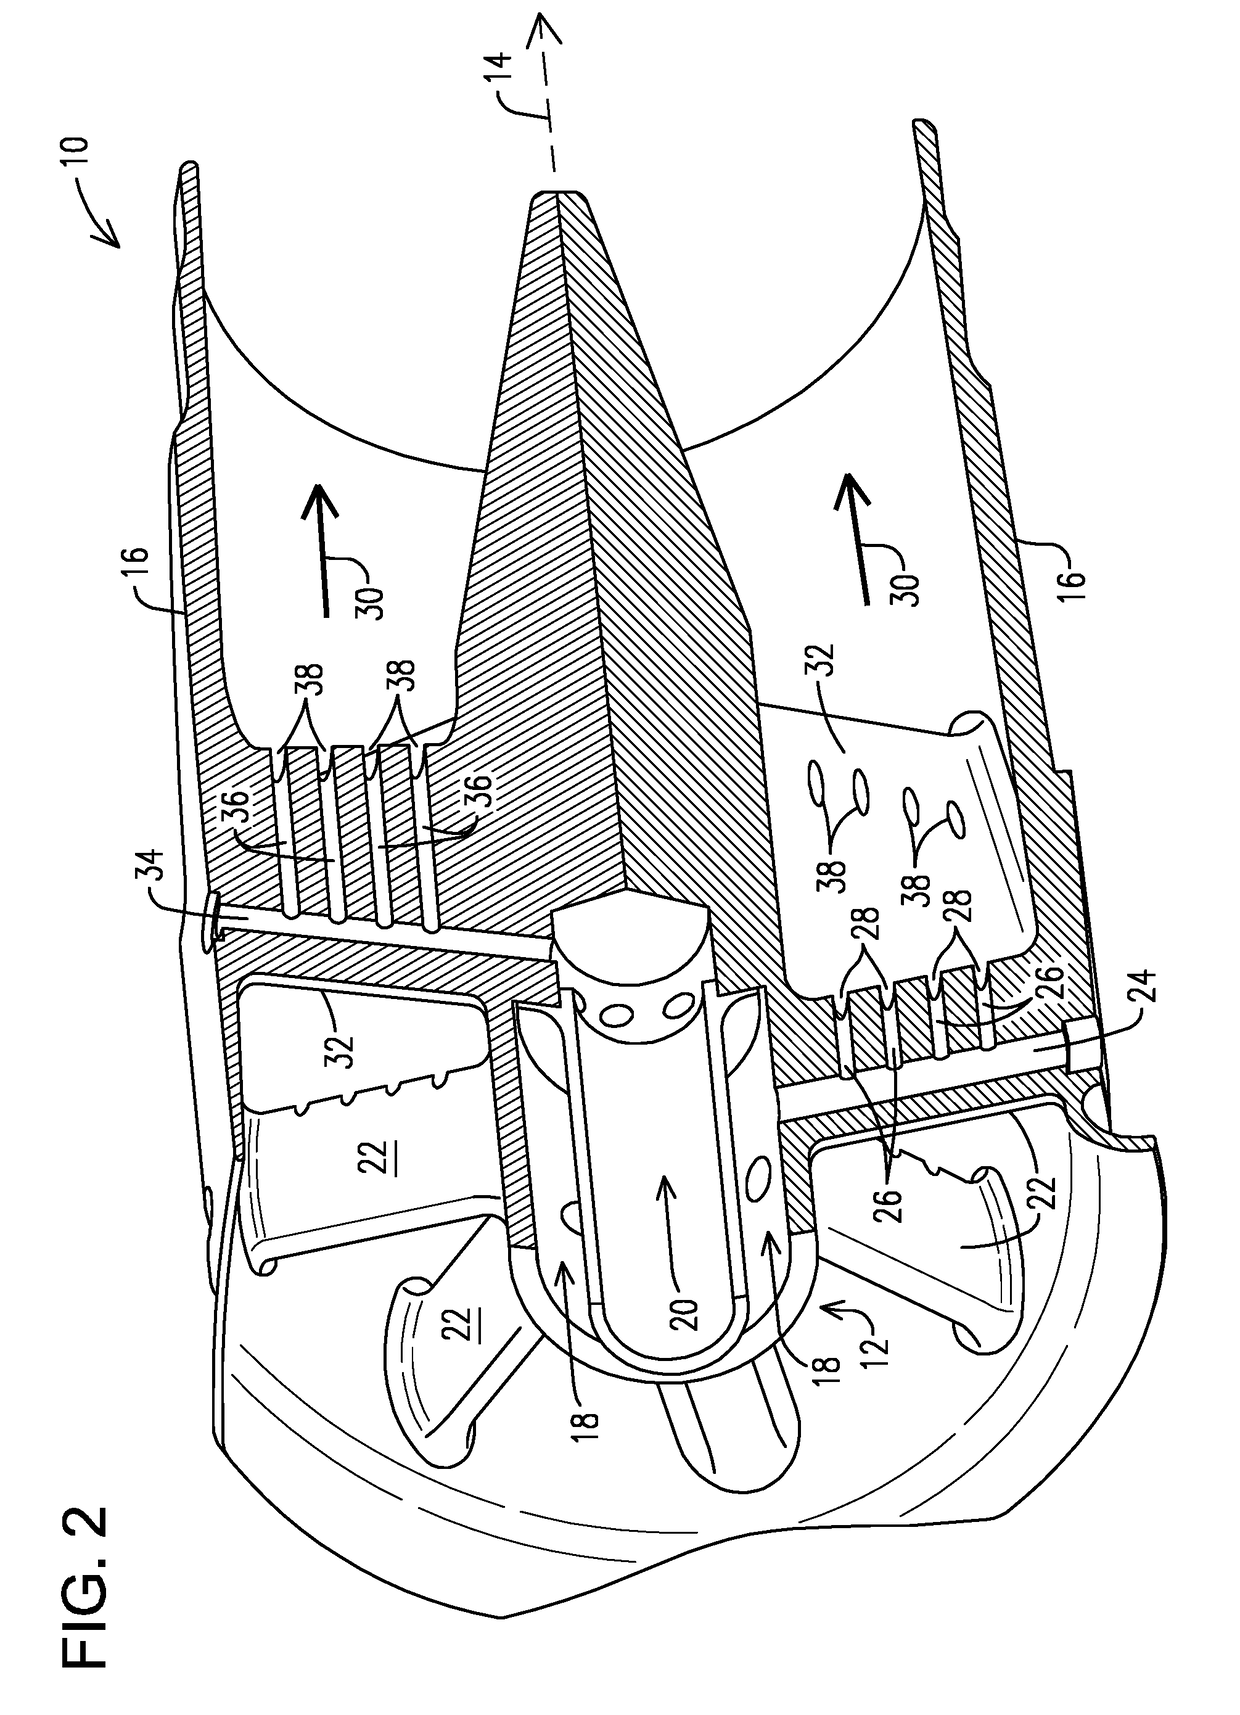 Fuel injector including tandem vanes for injecting alternate fuels in a gas turbine